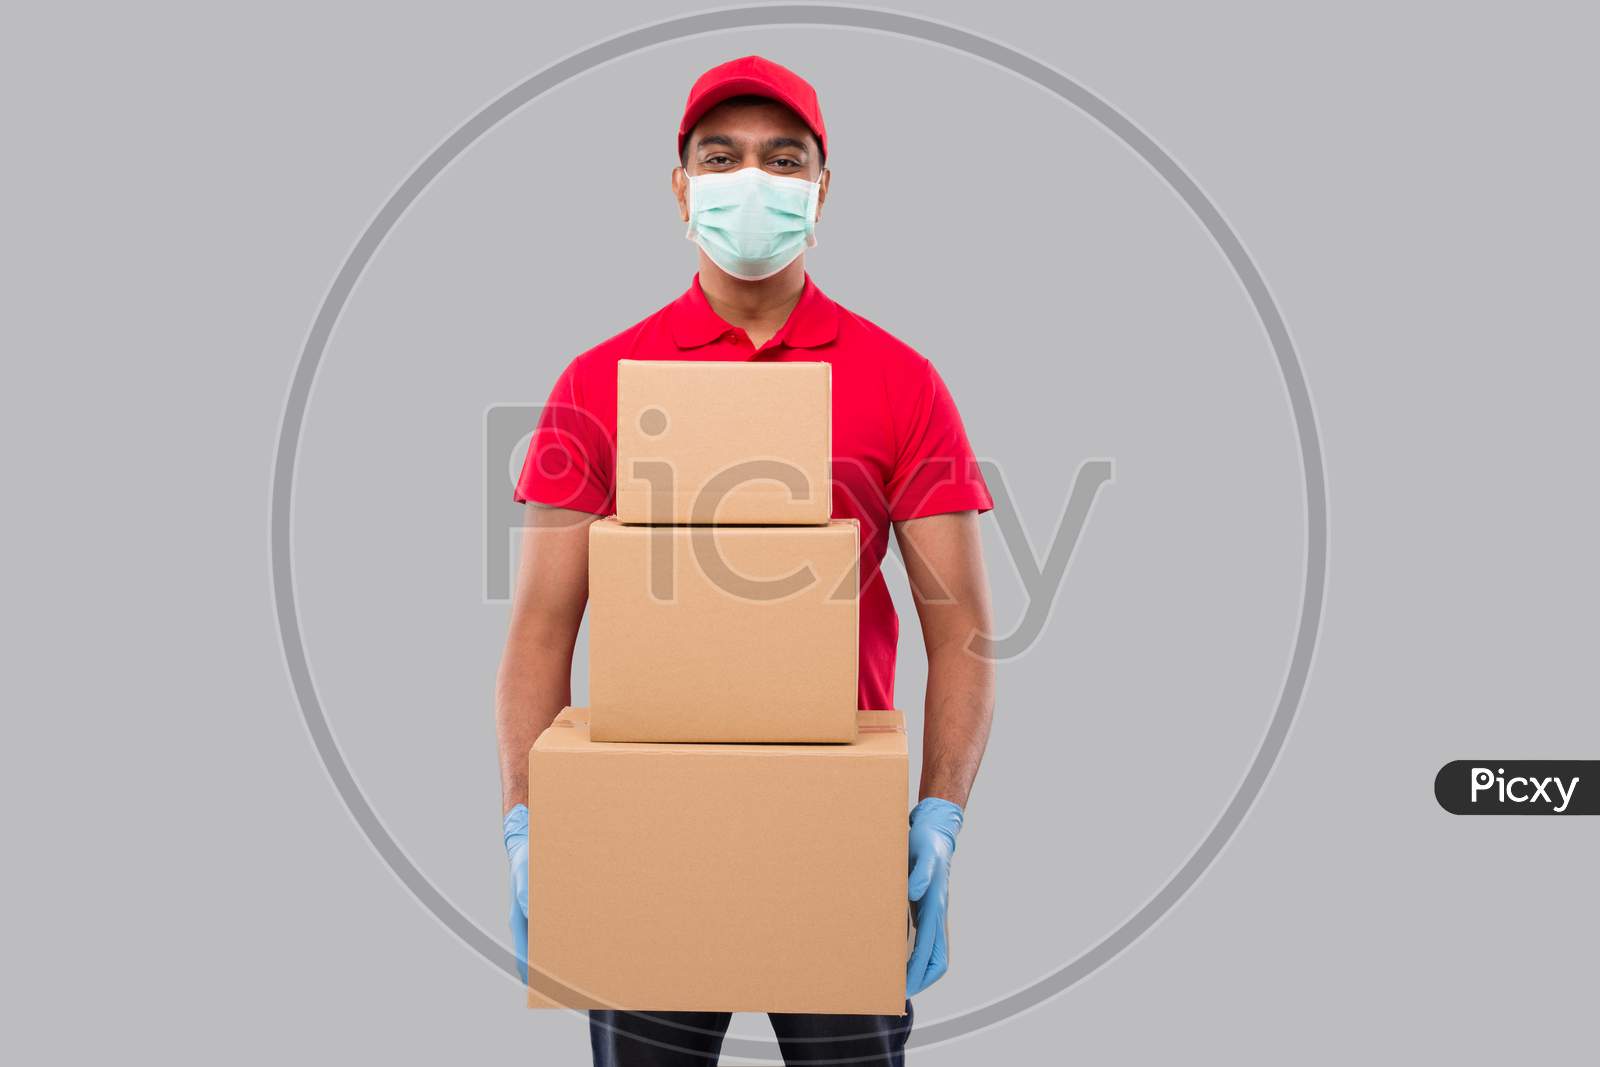 Delivery Man Holding Carton Boxes Wearing Medical Mask And Gloves Isolated. Indian Delivery Boy Smiling With Boxes In Hands